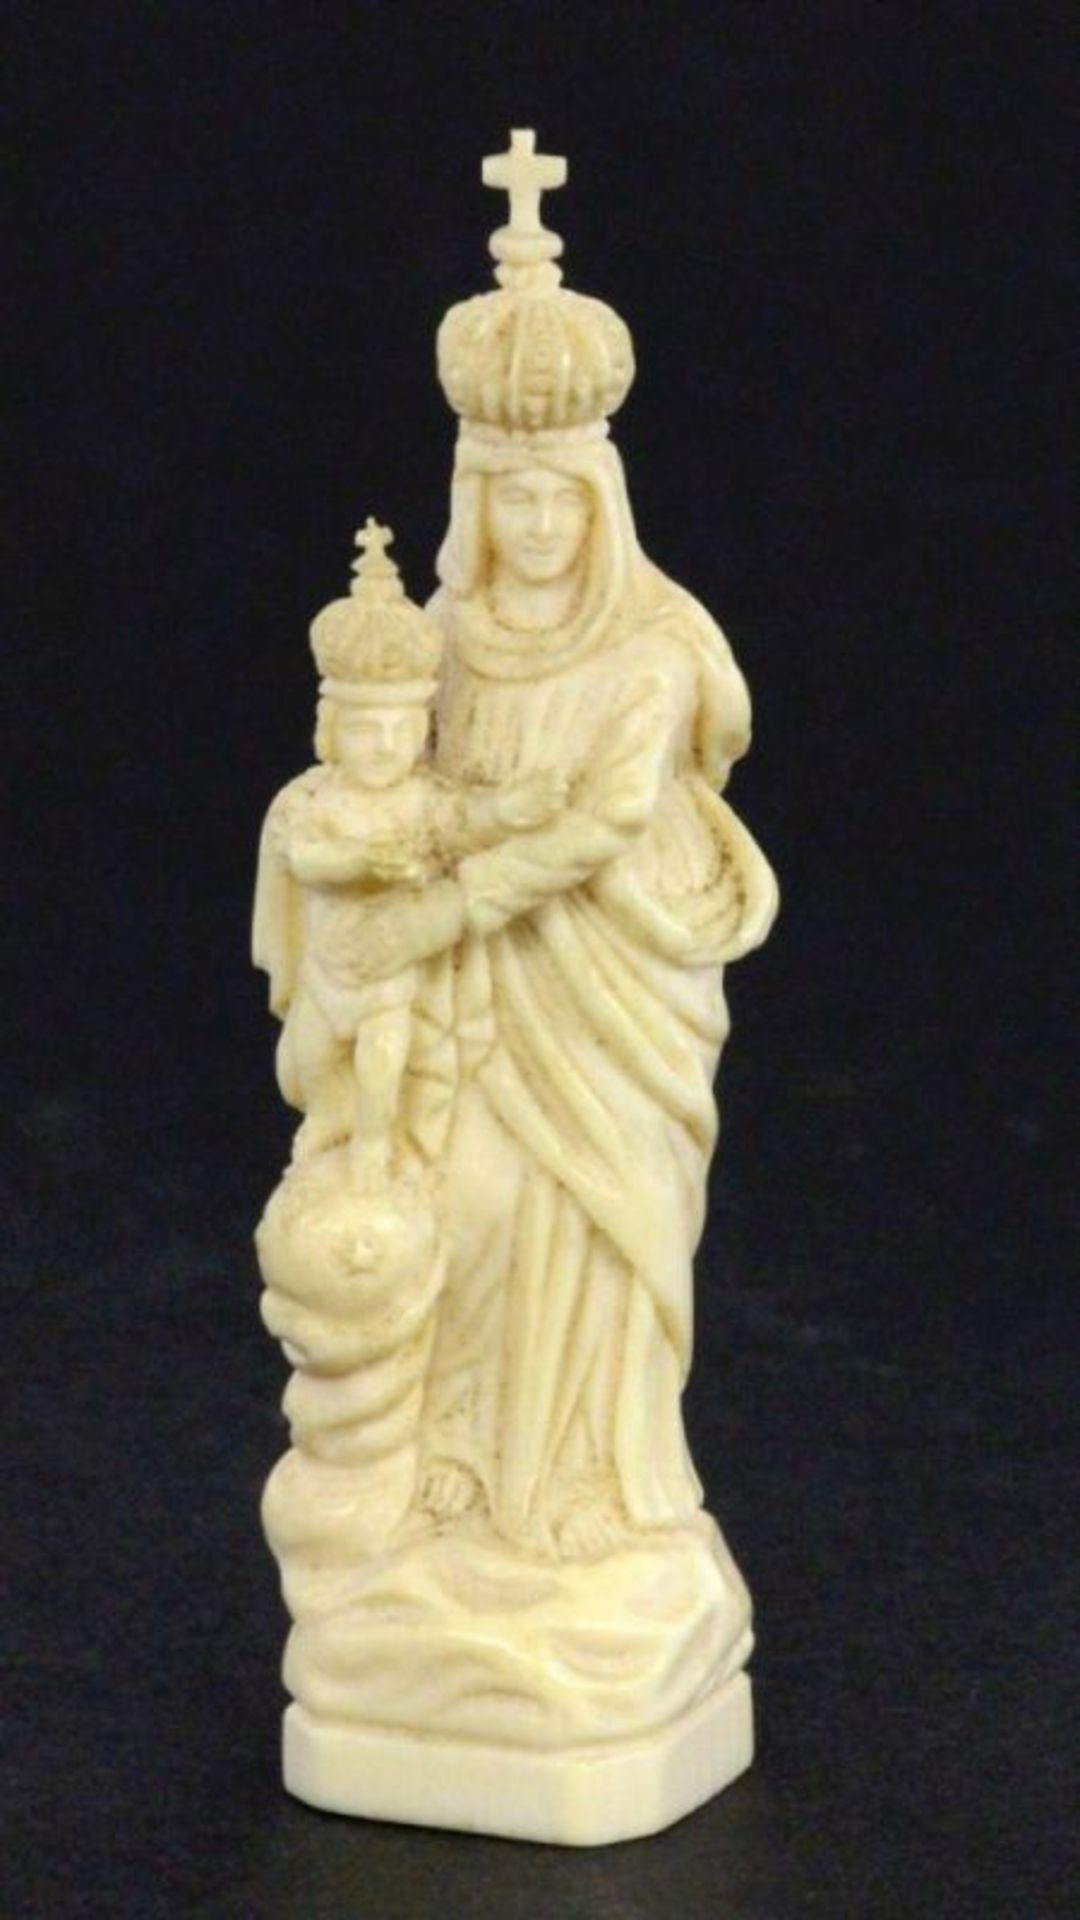 AN IVORY MADONNA France, 19th century Finely carved Madonna and Child made of ivory. In a